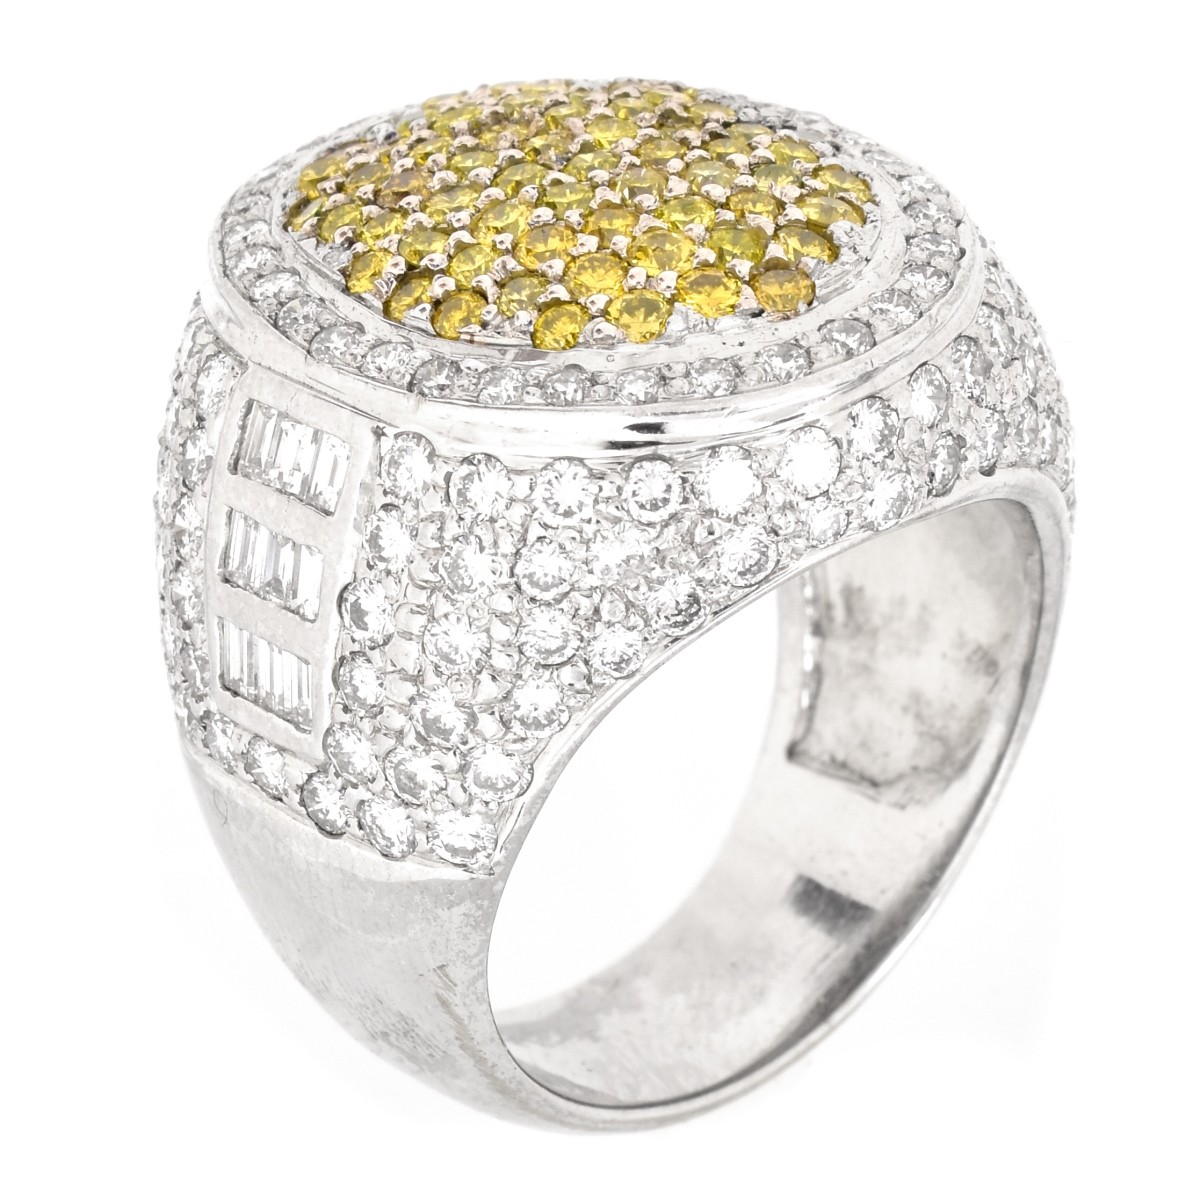 Man's Approx. 5.0 Carat Diamond and 14K Gold Ring